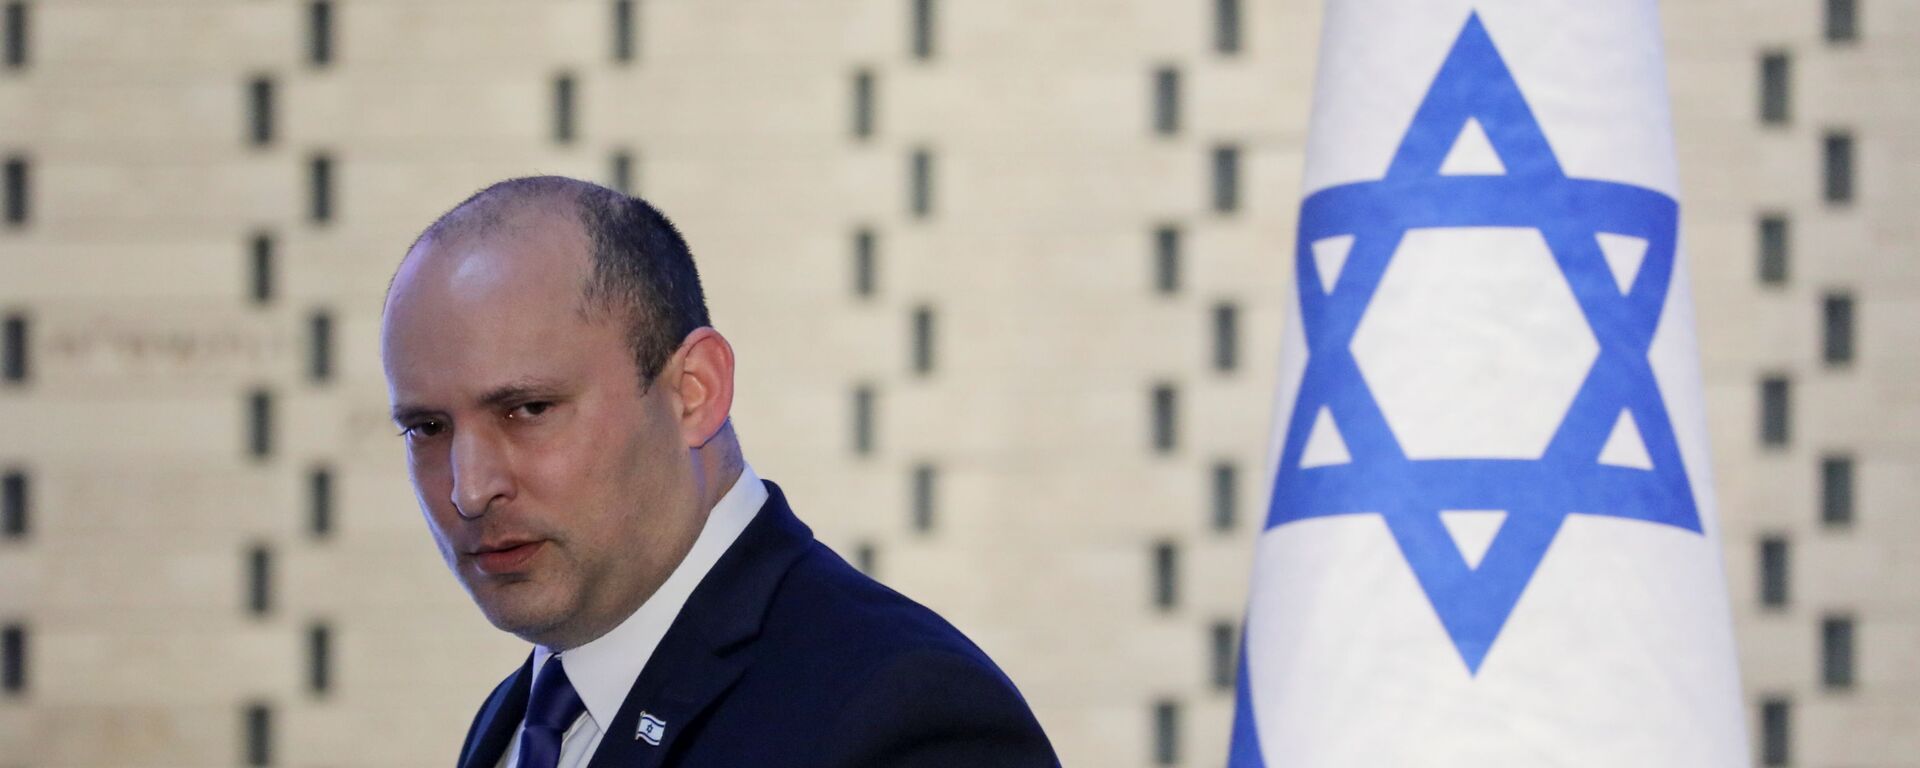 Israeli Prime Minister Naftali Bennett attends a memorial ceremony for soldiers who fell in the 2014 war with Gaza, at the Hall of Remembrance of Mount Herzl military cemetery in Jerusalem June 20, 2021 - Sputnik International, 1920, 22.07.2021